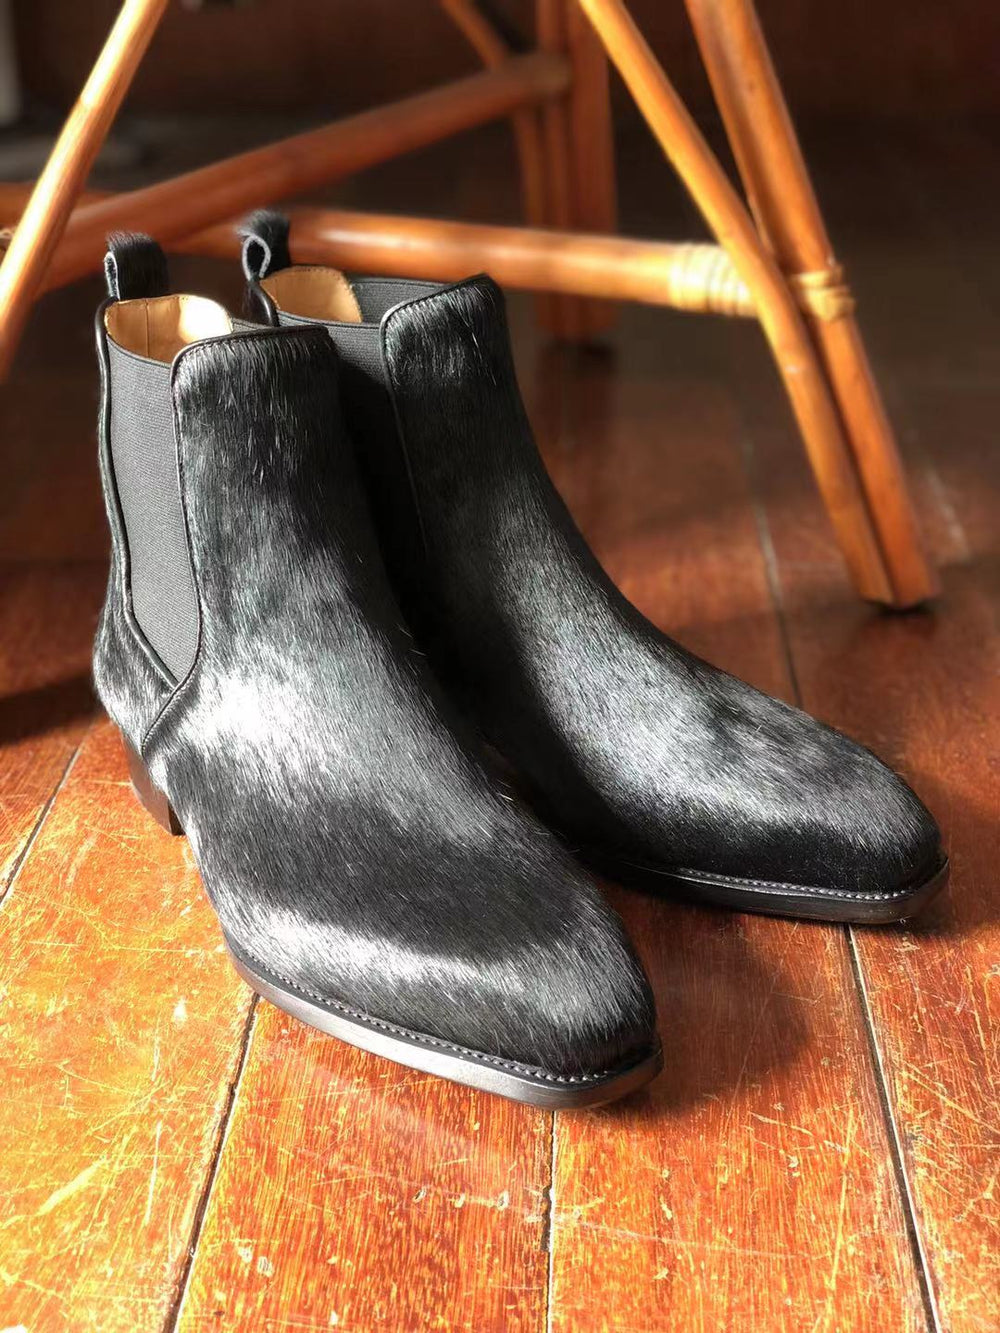 Fiddle-Back/Beveled Waist High Quality Leather Men's Chelsea Boot All For Me Today